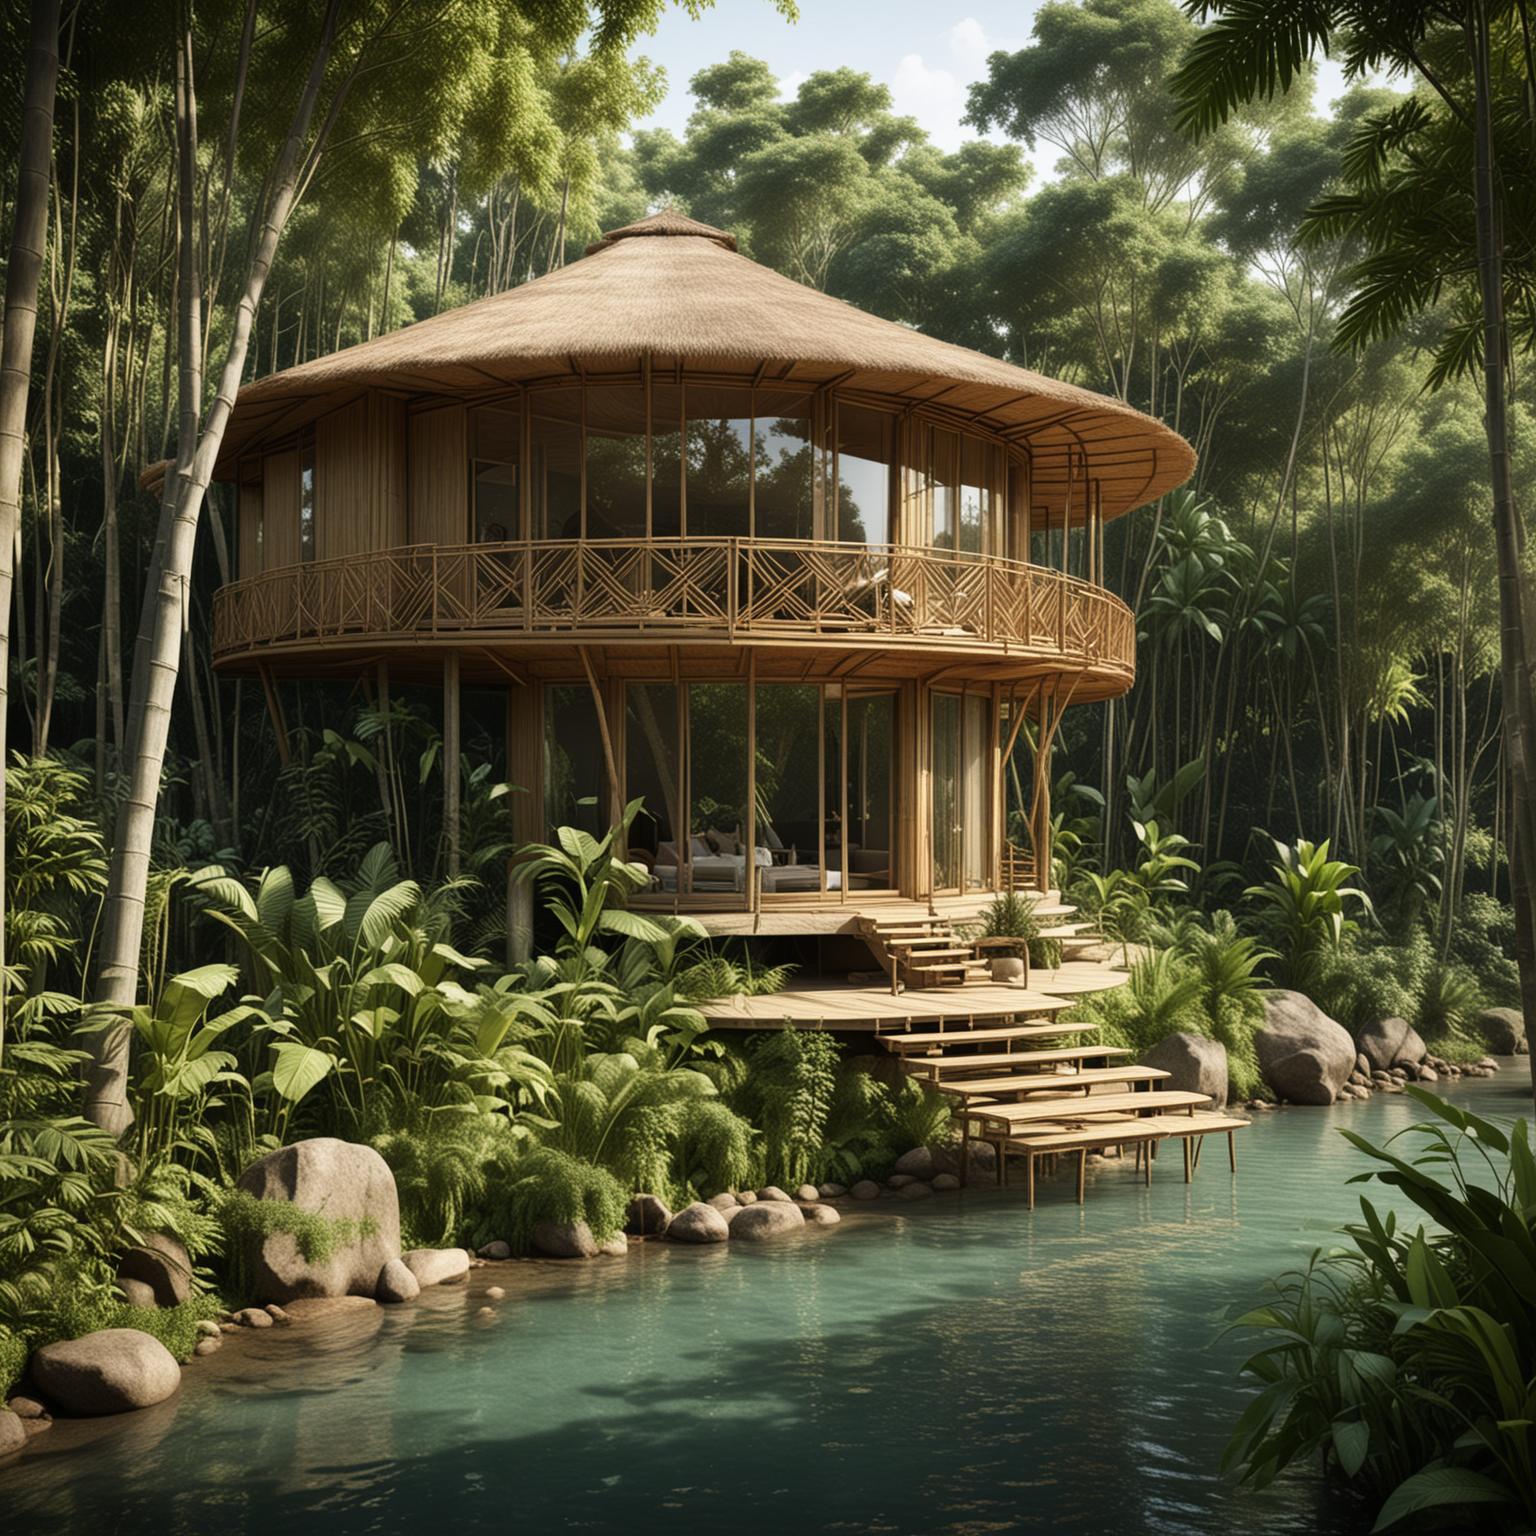  a small villa made out of bamboo in a tropical forest near a river, one story height, The over design of the structure should be modern and with organic shapes, it must be created using sacred geometry into consideration for the proportions and aesthetics of the villa. it need to have walls and big windows, it should have a deck area outside for people to overlook the jungle